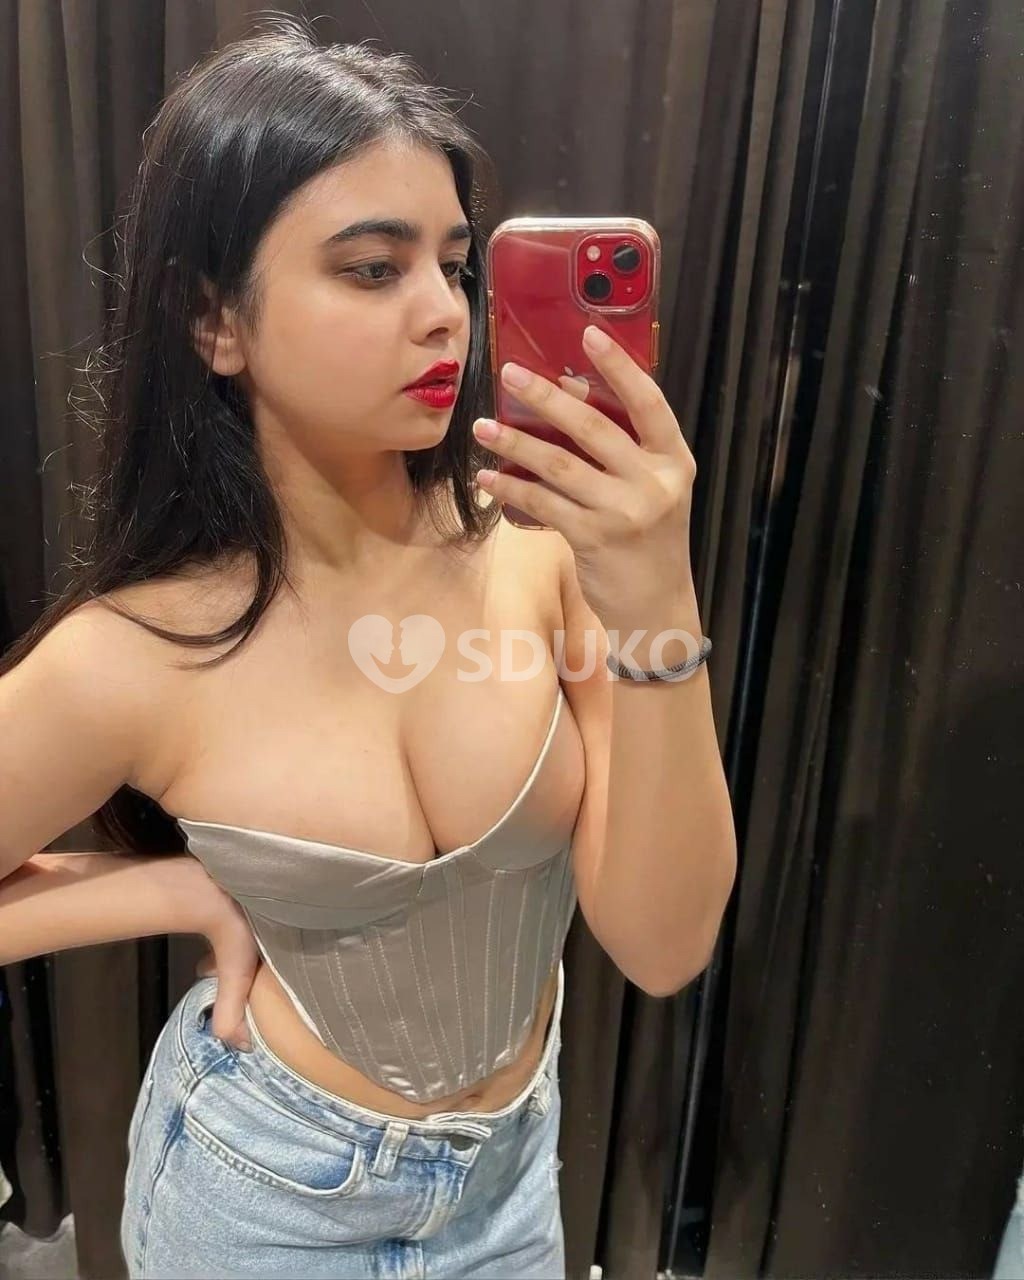 Bangalore vip genuine in ⭐⭐⭐💯 Royal Eskort Sarvice Safe and secure service low price High profile girls avahsh